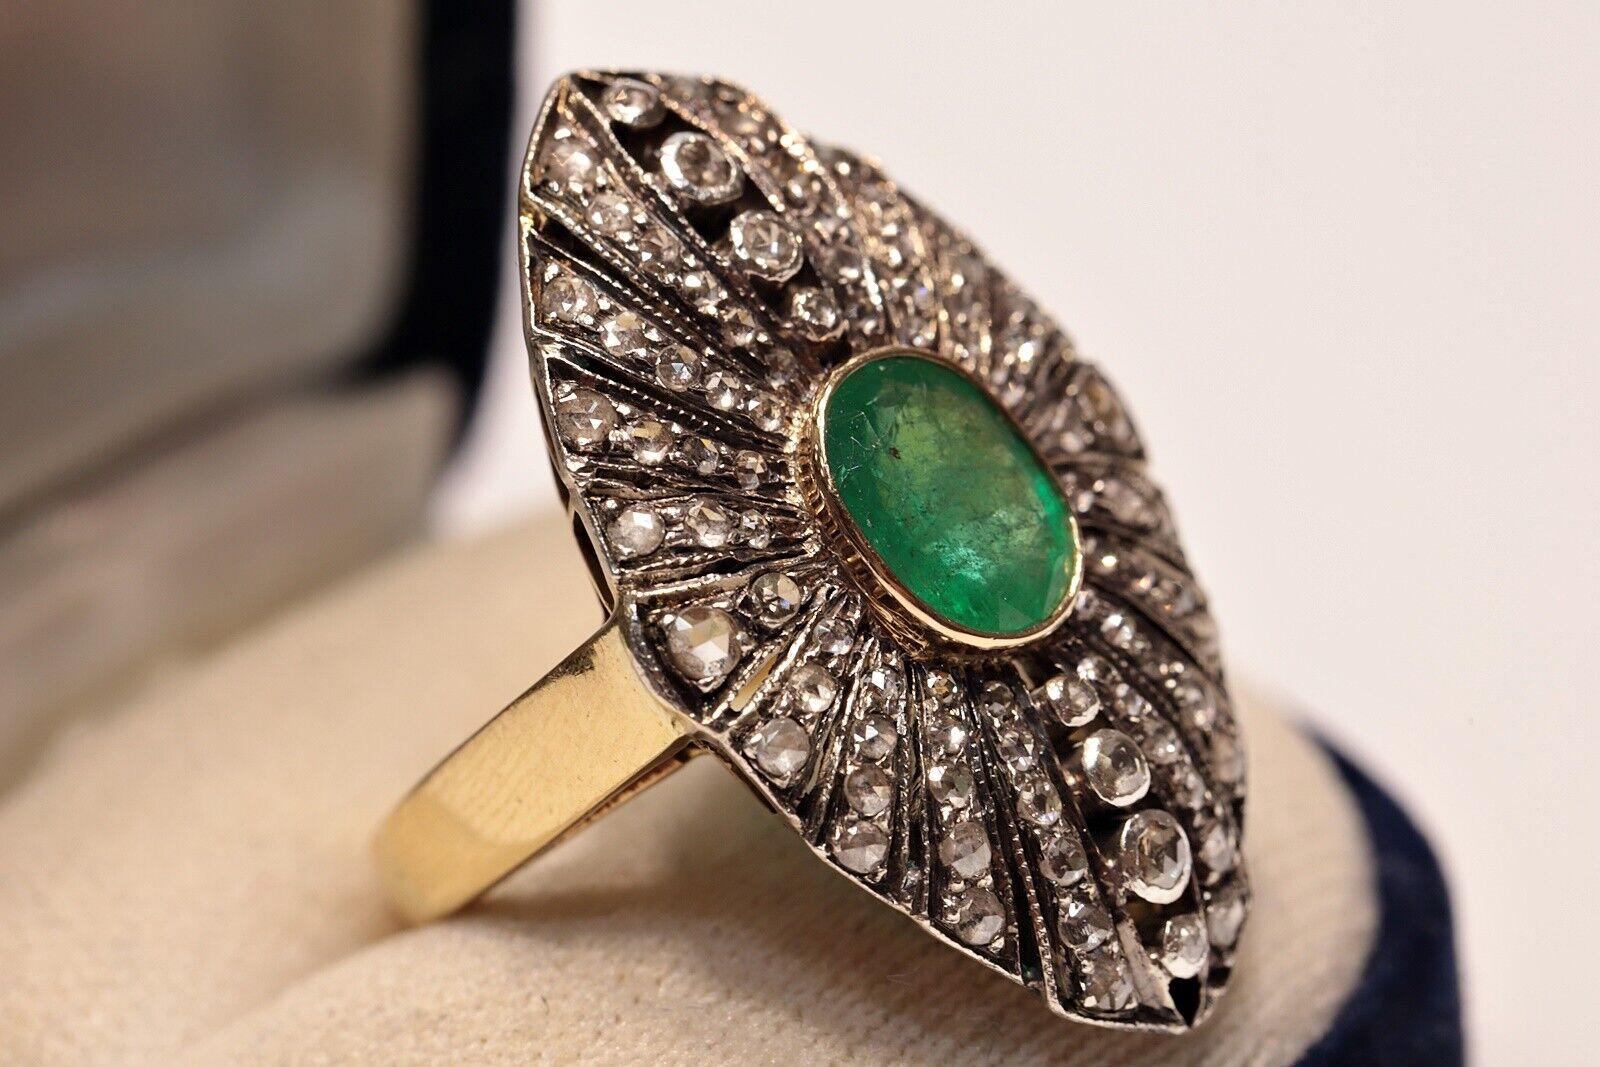  Circa 1900s 18k Gold Top Silver Natural Rose Cut Diamond And Emerald Ring In Good Condition For Sale In Fatih/İstanbul, 34